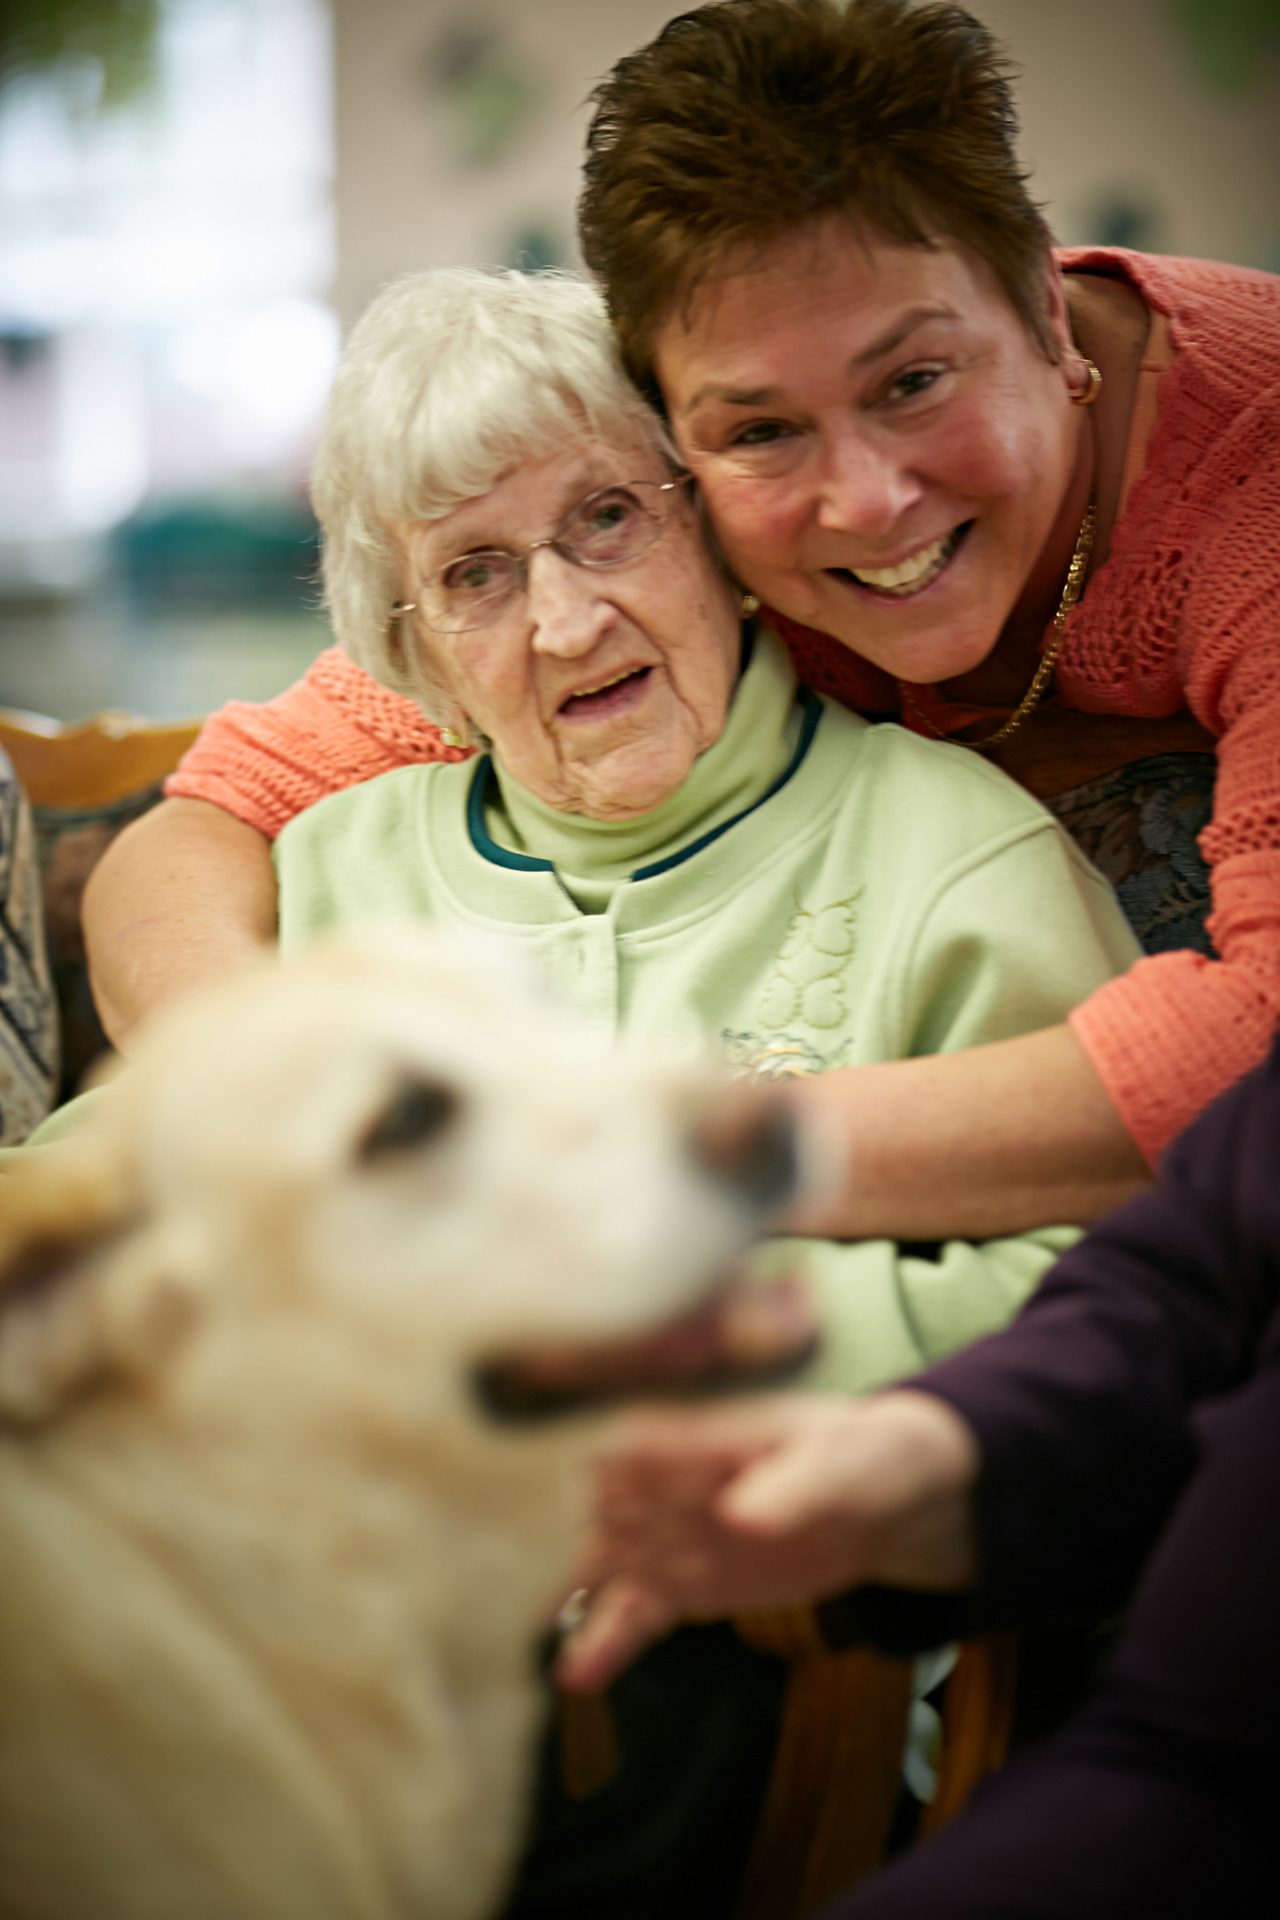 A caregiver hugs an elderly woman, with a dog in the foreground.